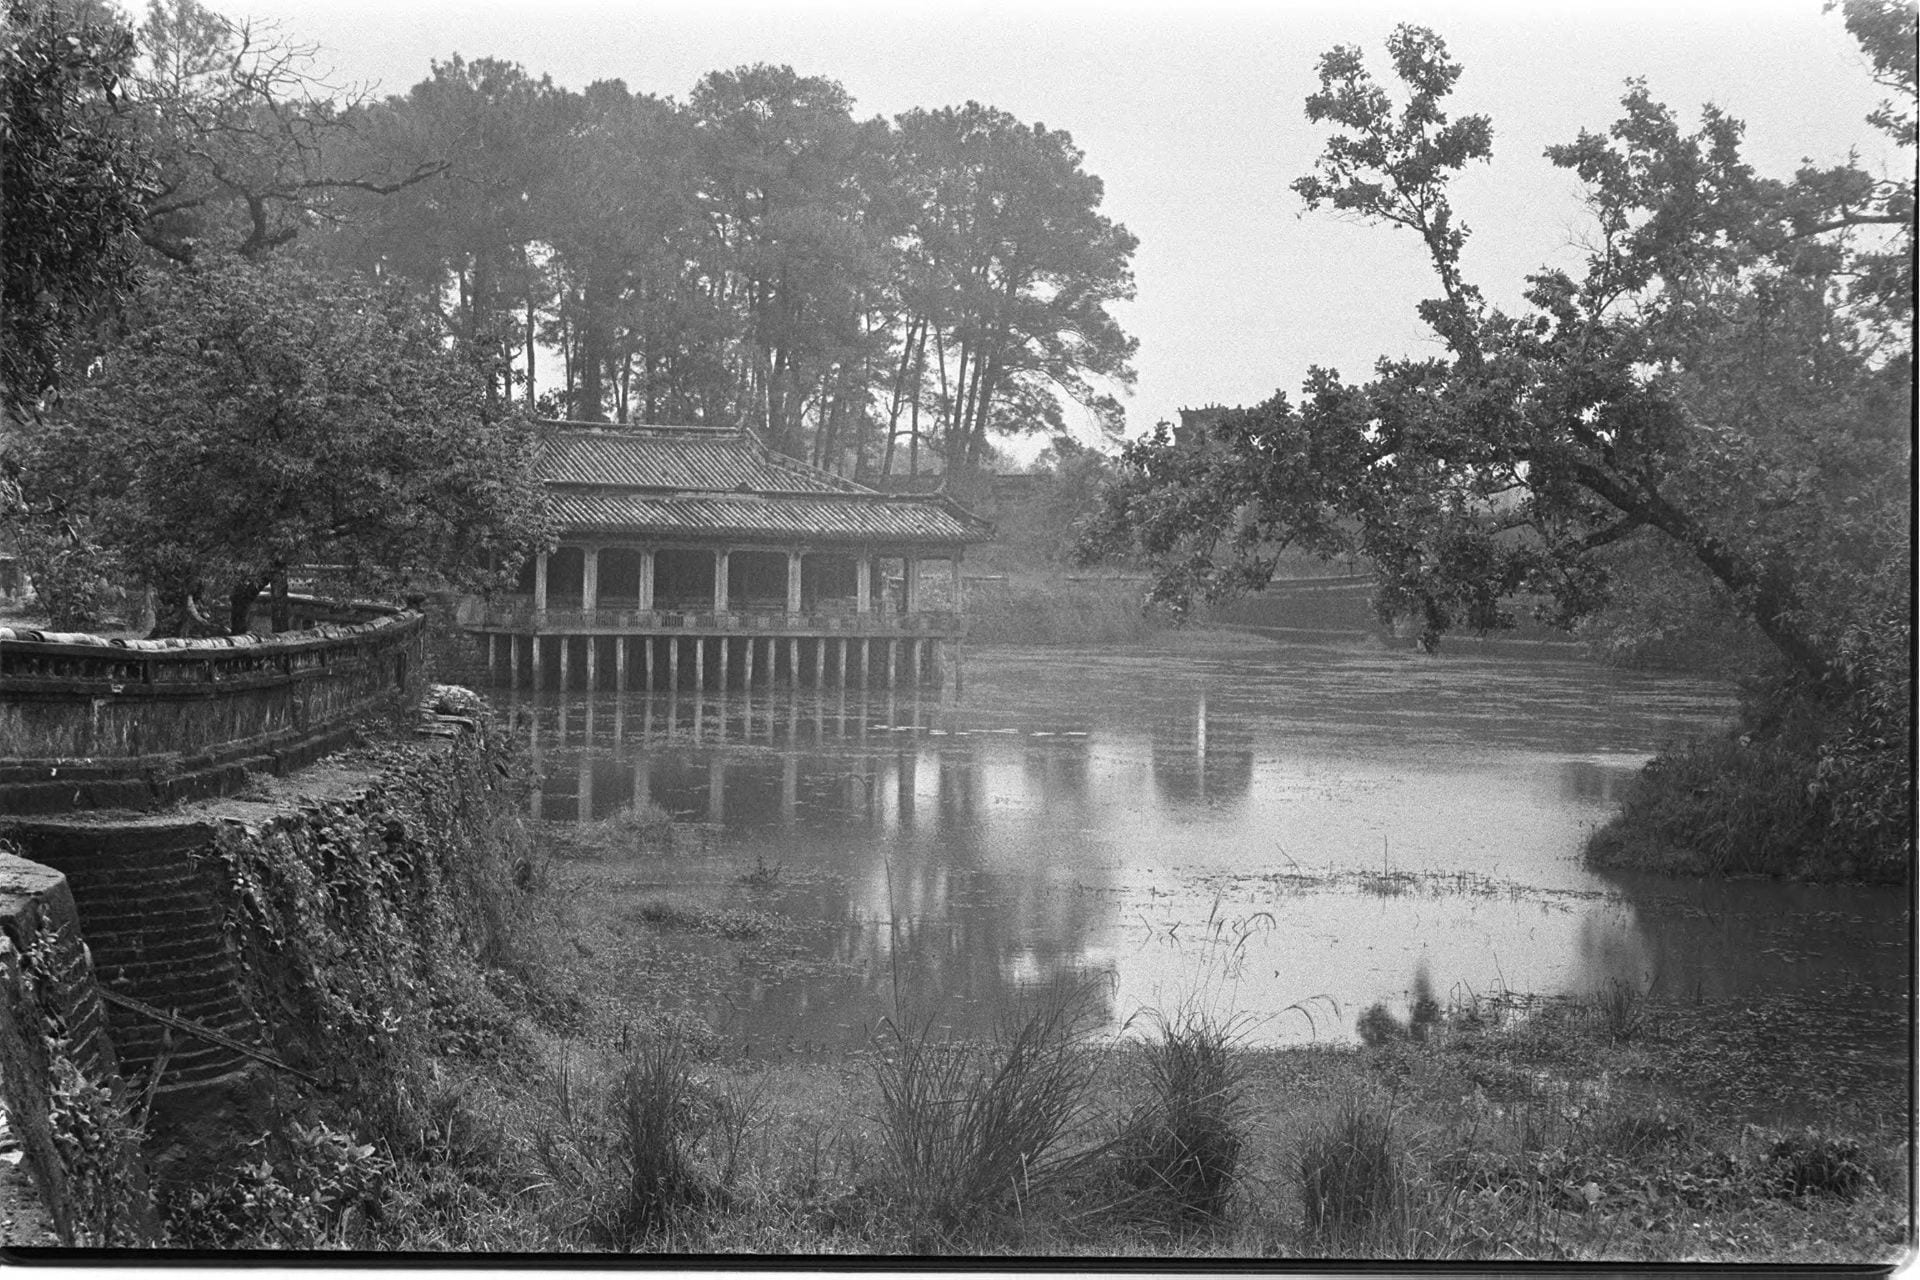 Black-and-white photo of an Imperial tomb on water surrounded by trees